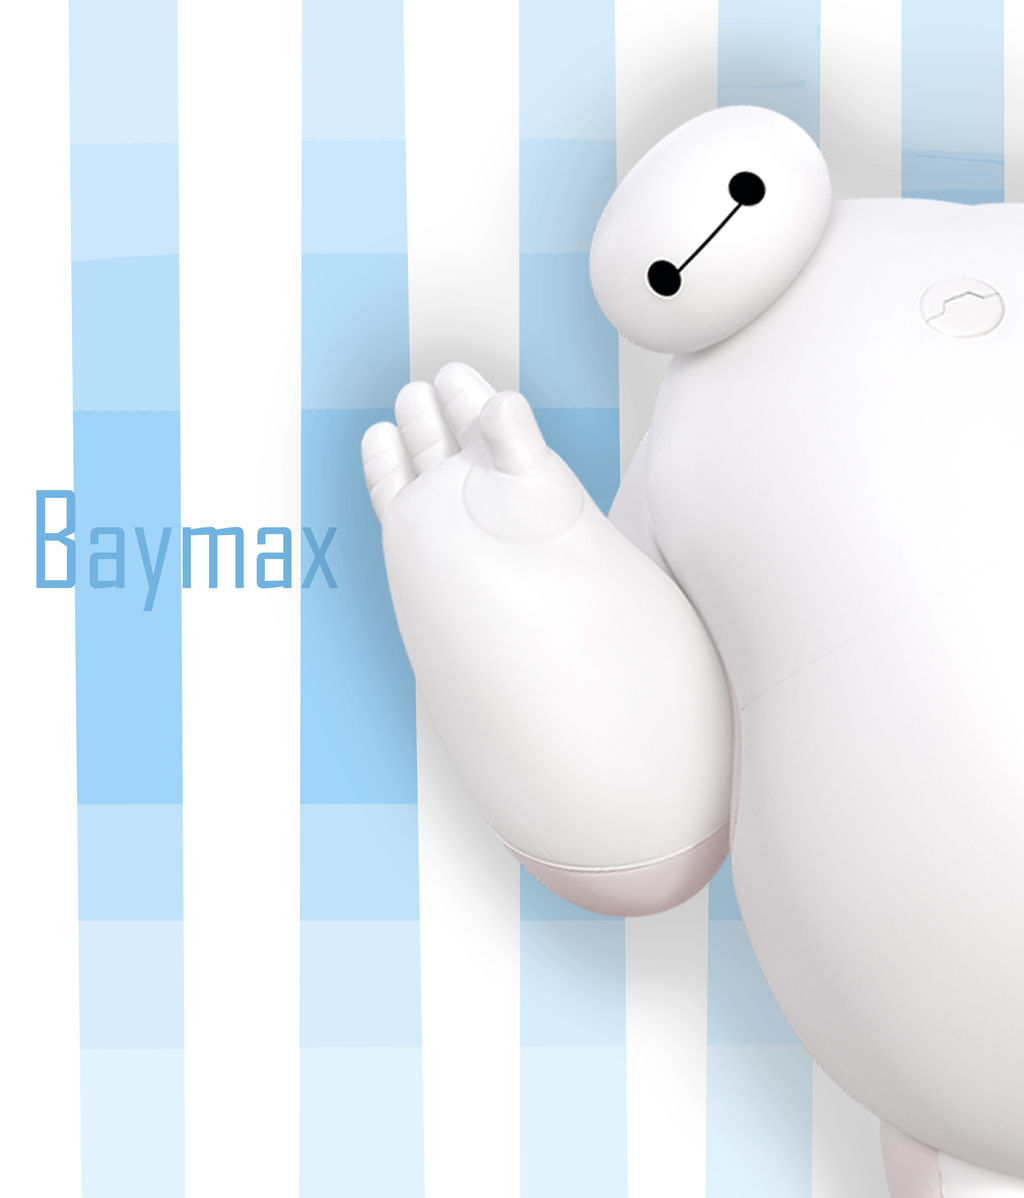 Baymax Wallpaper By Clam5hell On Deviantart